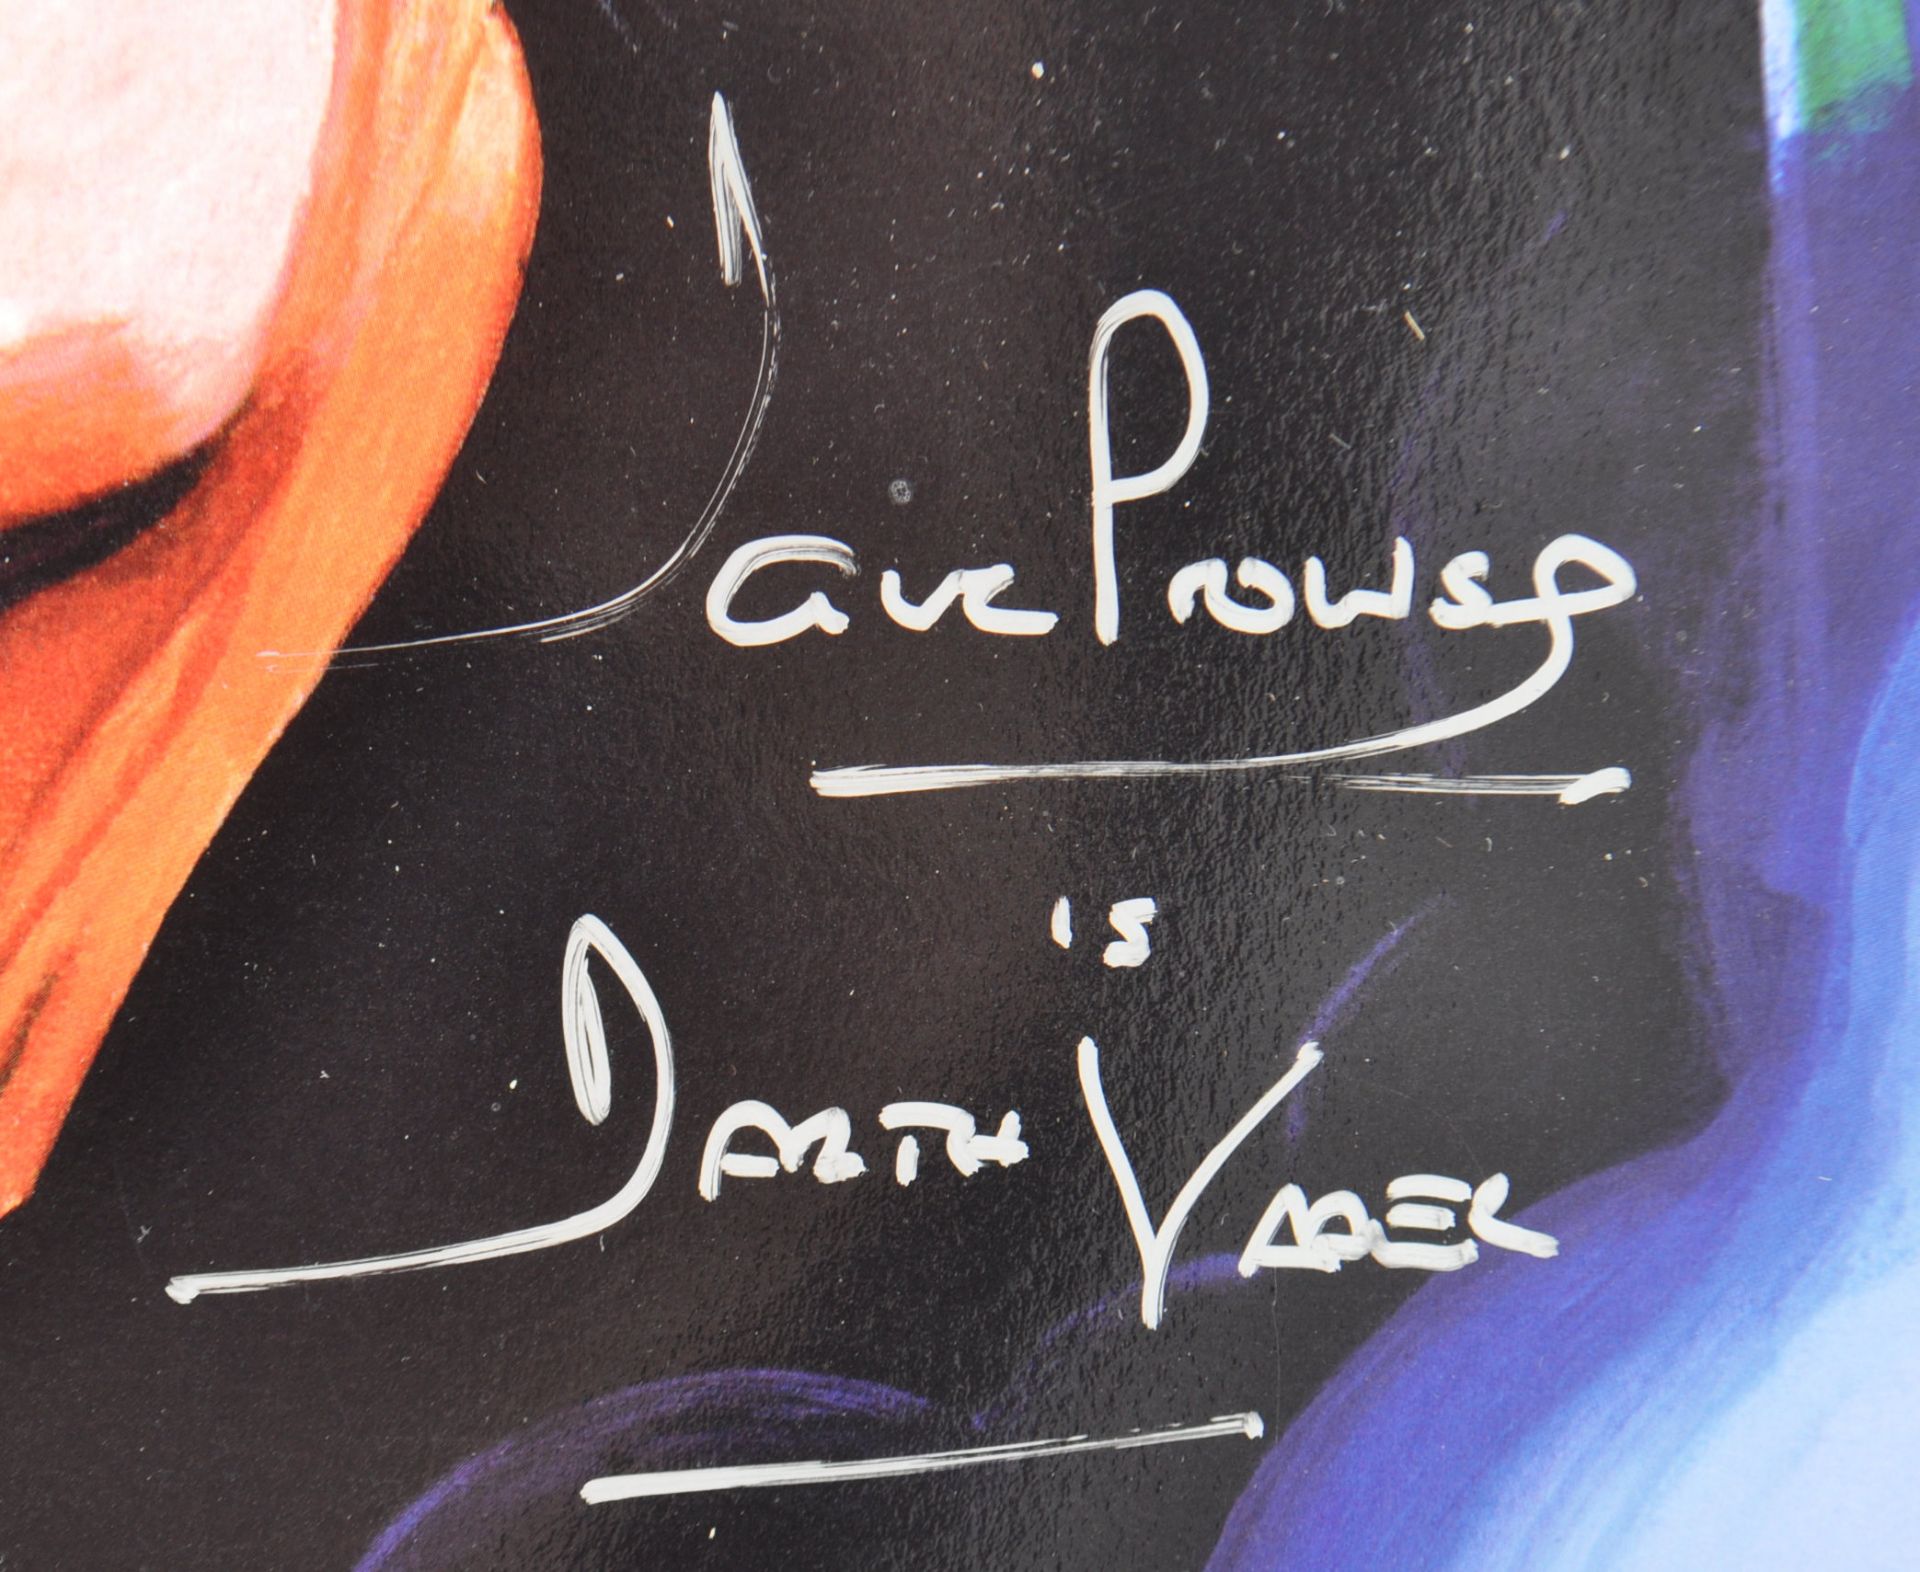 ESTATE OF DAVE PROWSE - SIGNED MONTAGE ARTWORK PRINT - Image 3 of 3